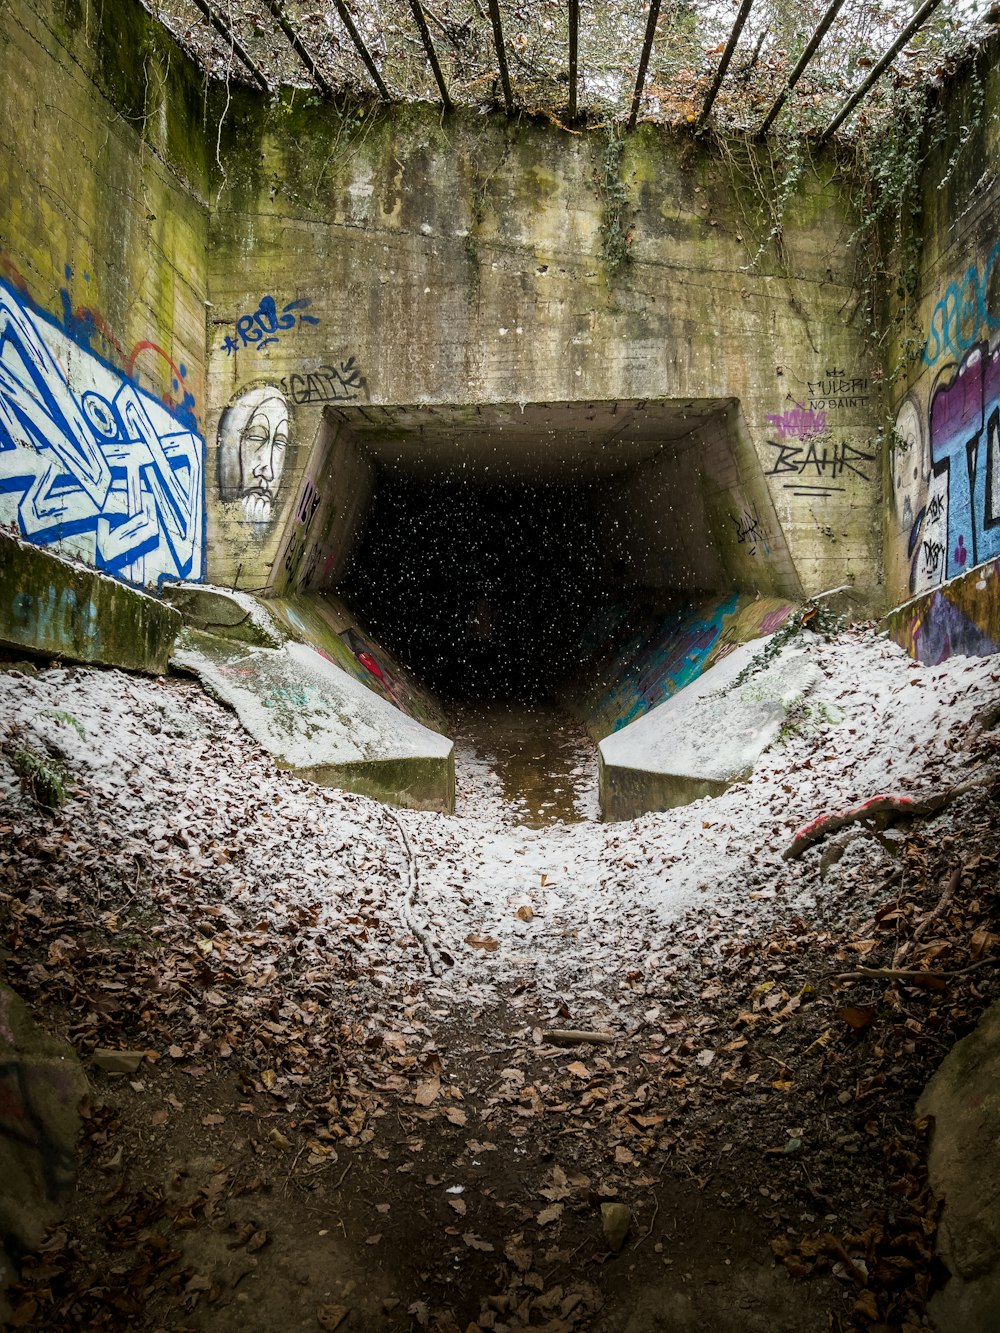 a concrete tunnel with graffiti on the walls